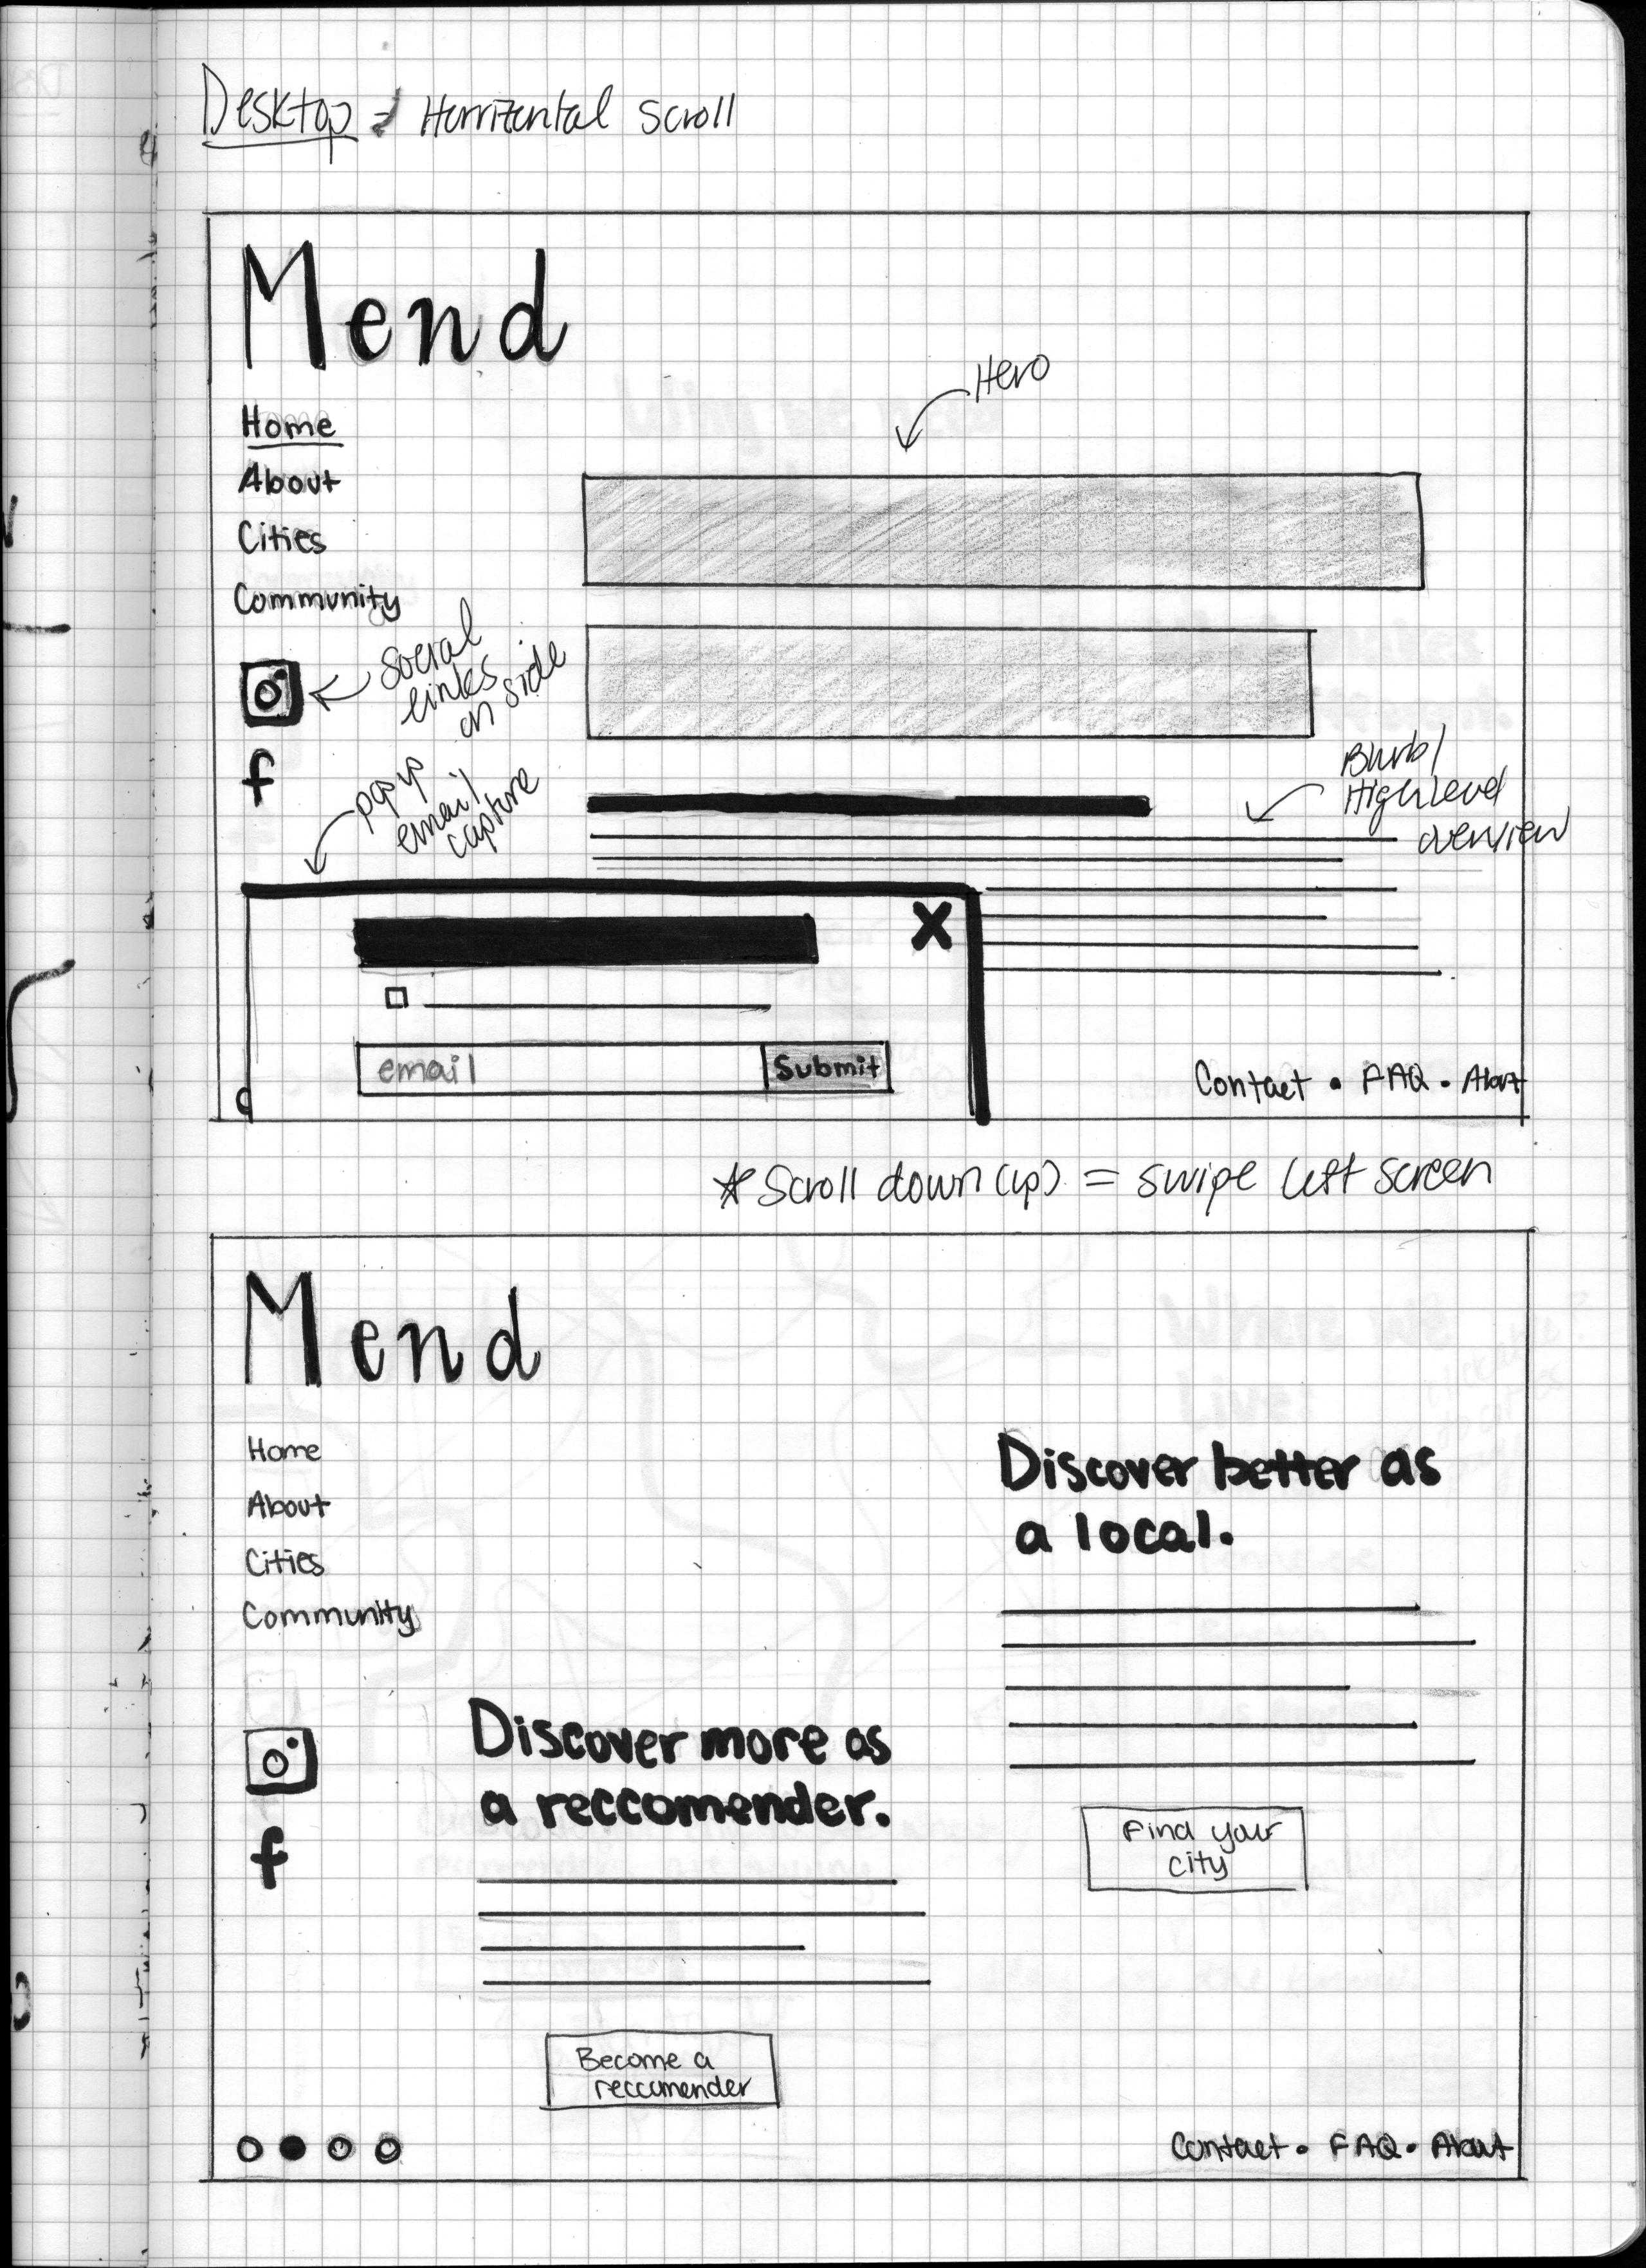 A desktop wireframe of the homepage showing a horrizontal scroll UX. Users would naviage through the homepage left to right like flipping through a page by scrolling up with their mouse or trackpad.